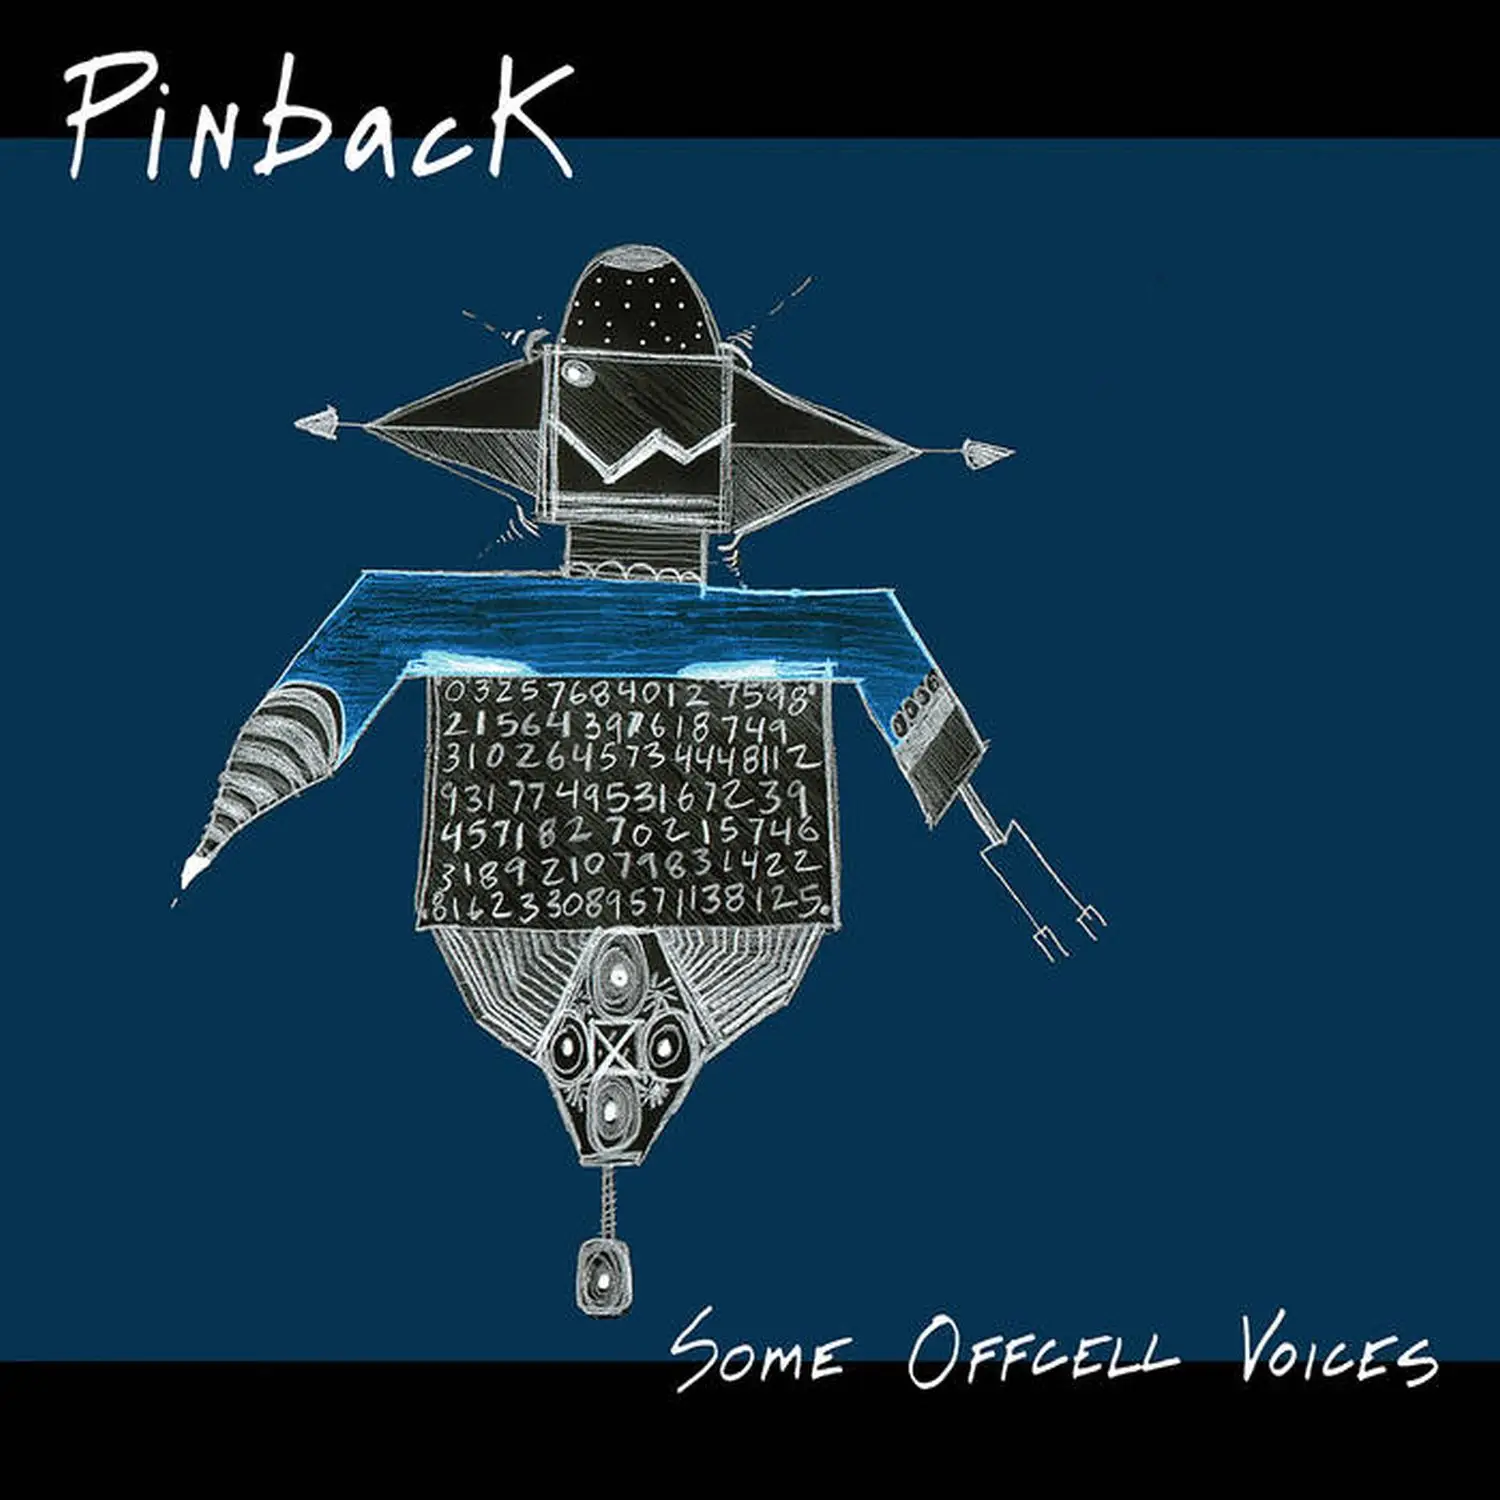 <strong>Pinback - Some Offcell Voices</strong> (Vinyl LP - orange)